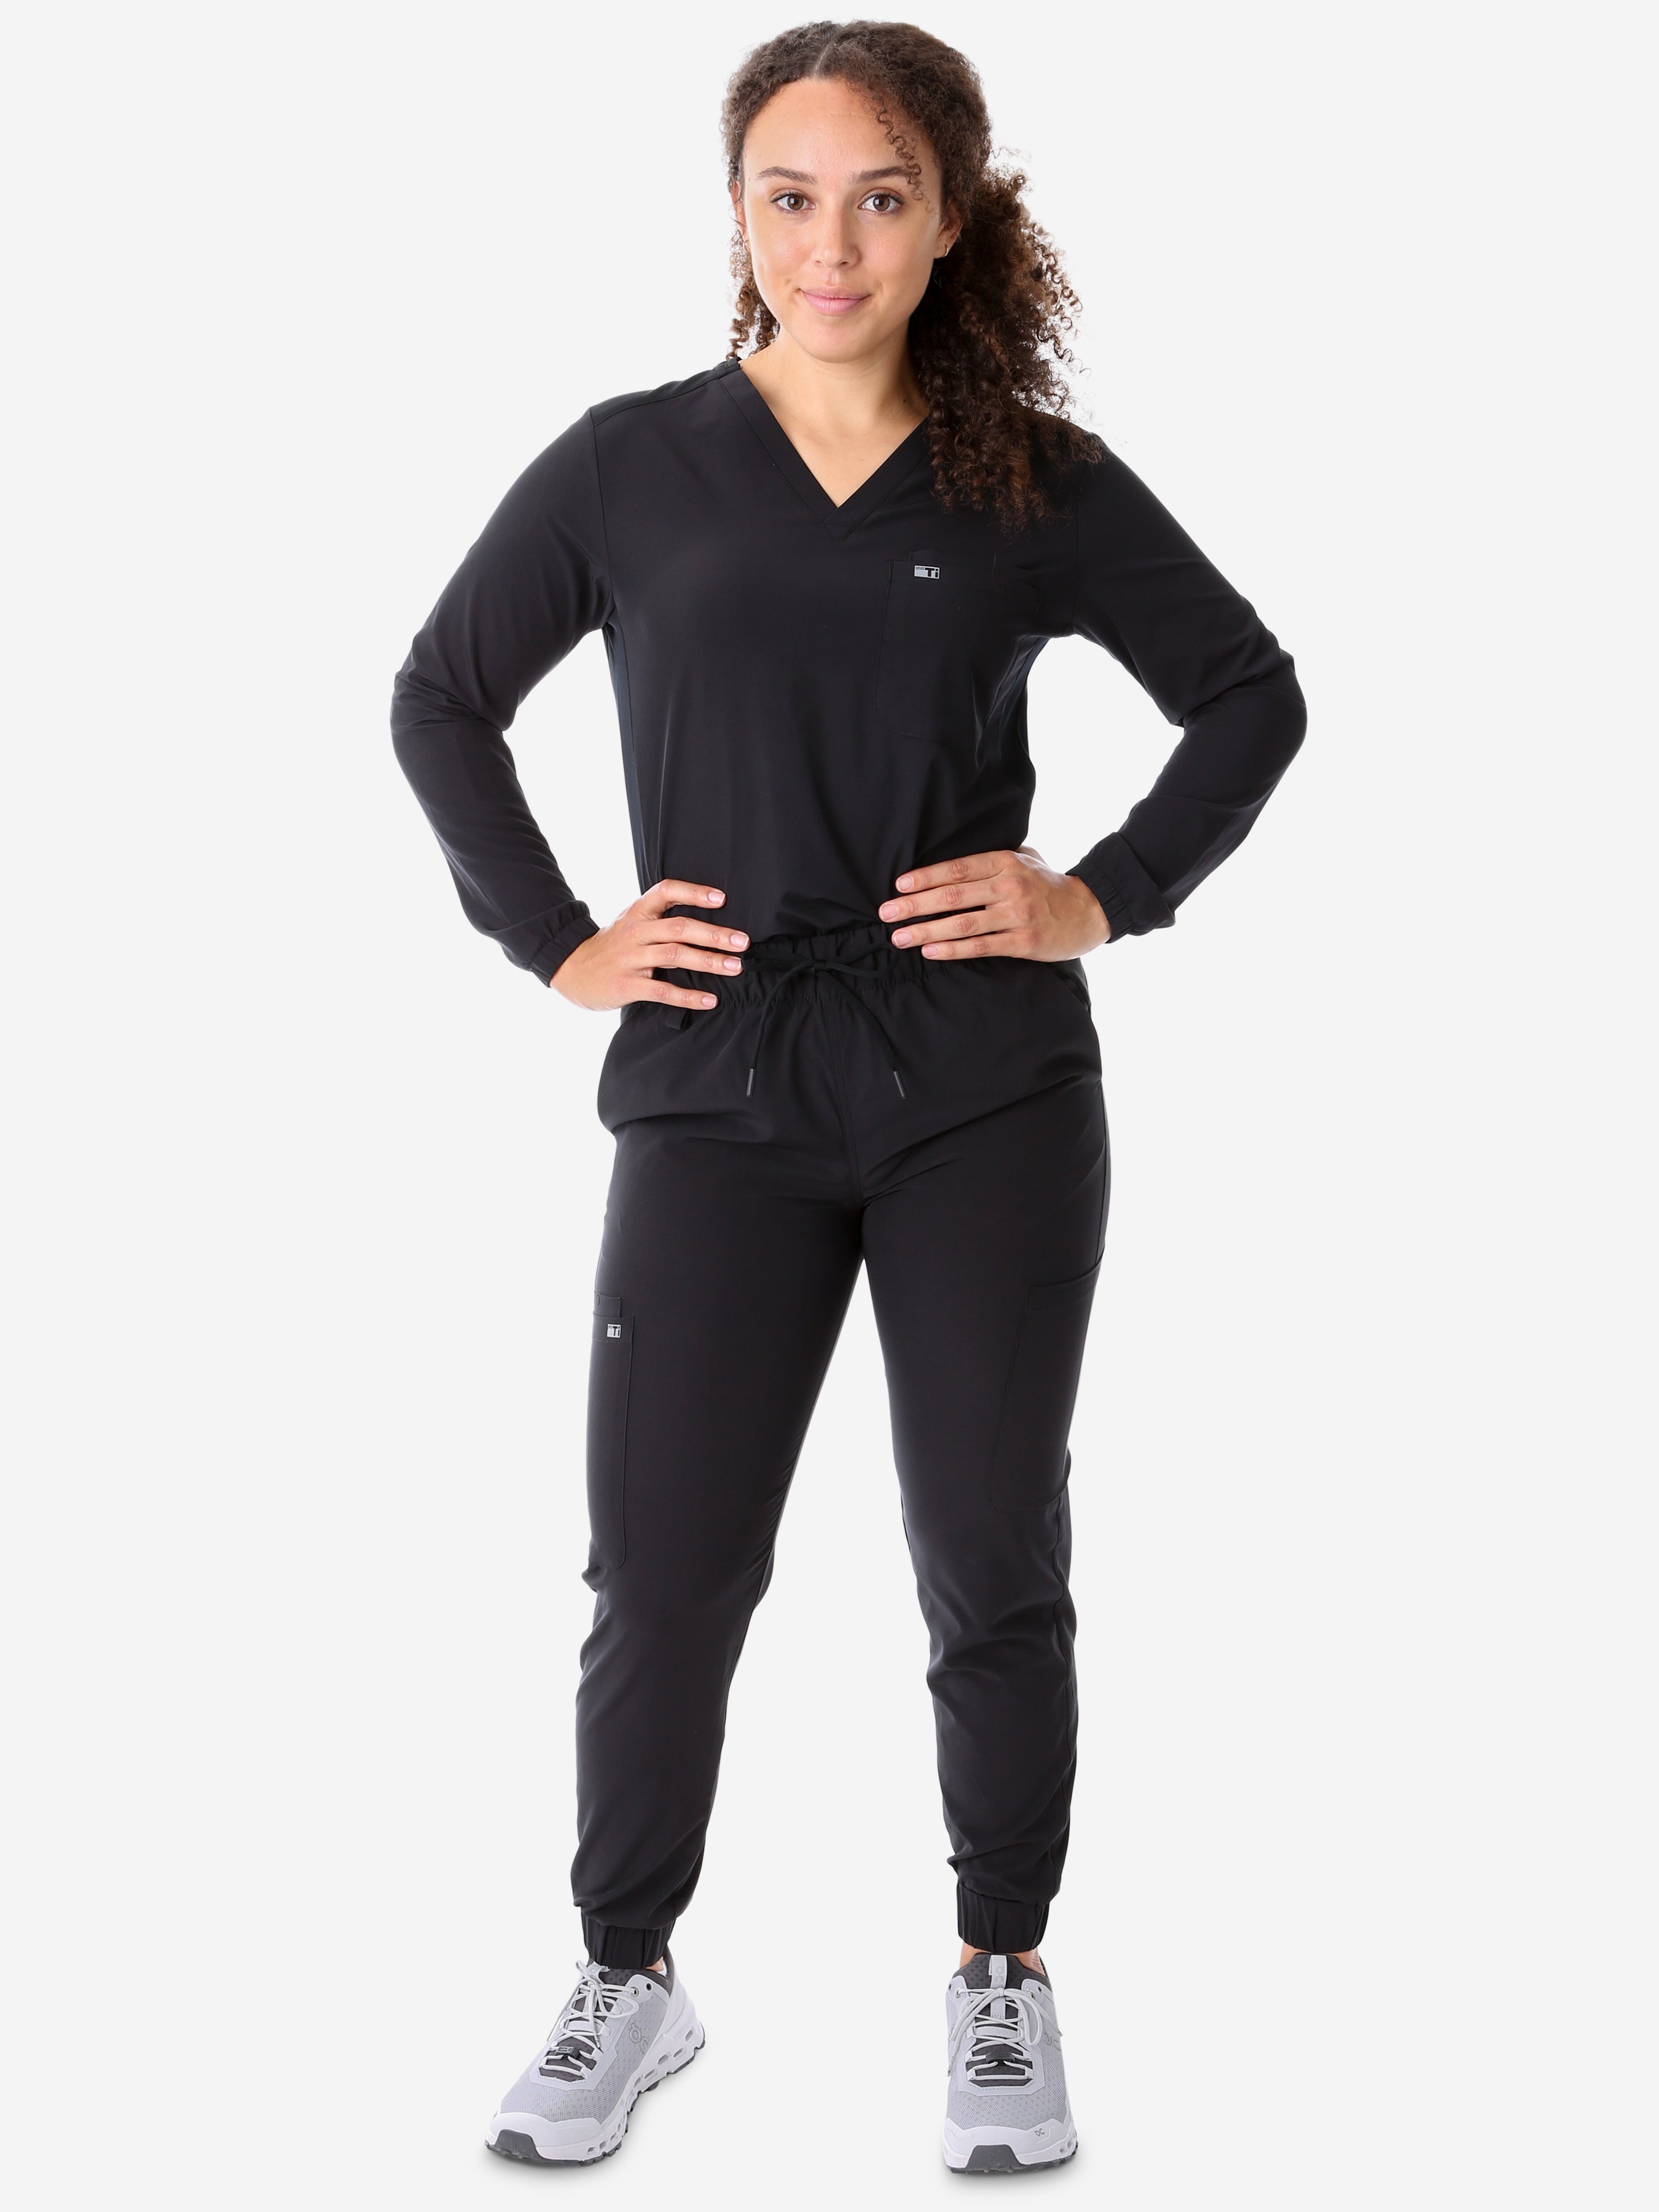 Women's Real Black Long-Sleeve Scrub Tucked Full Body Front View with Perfect Joggers